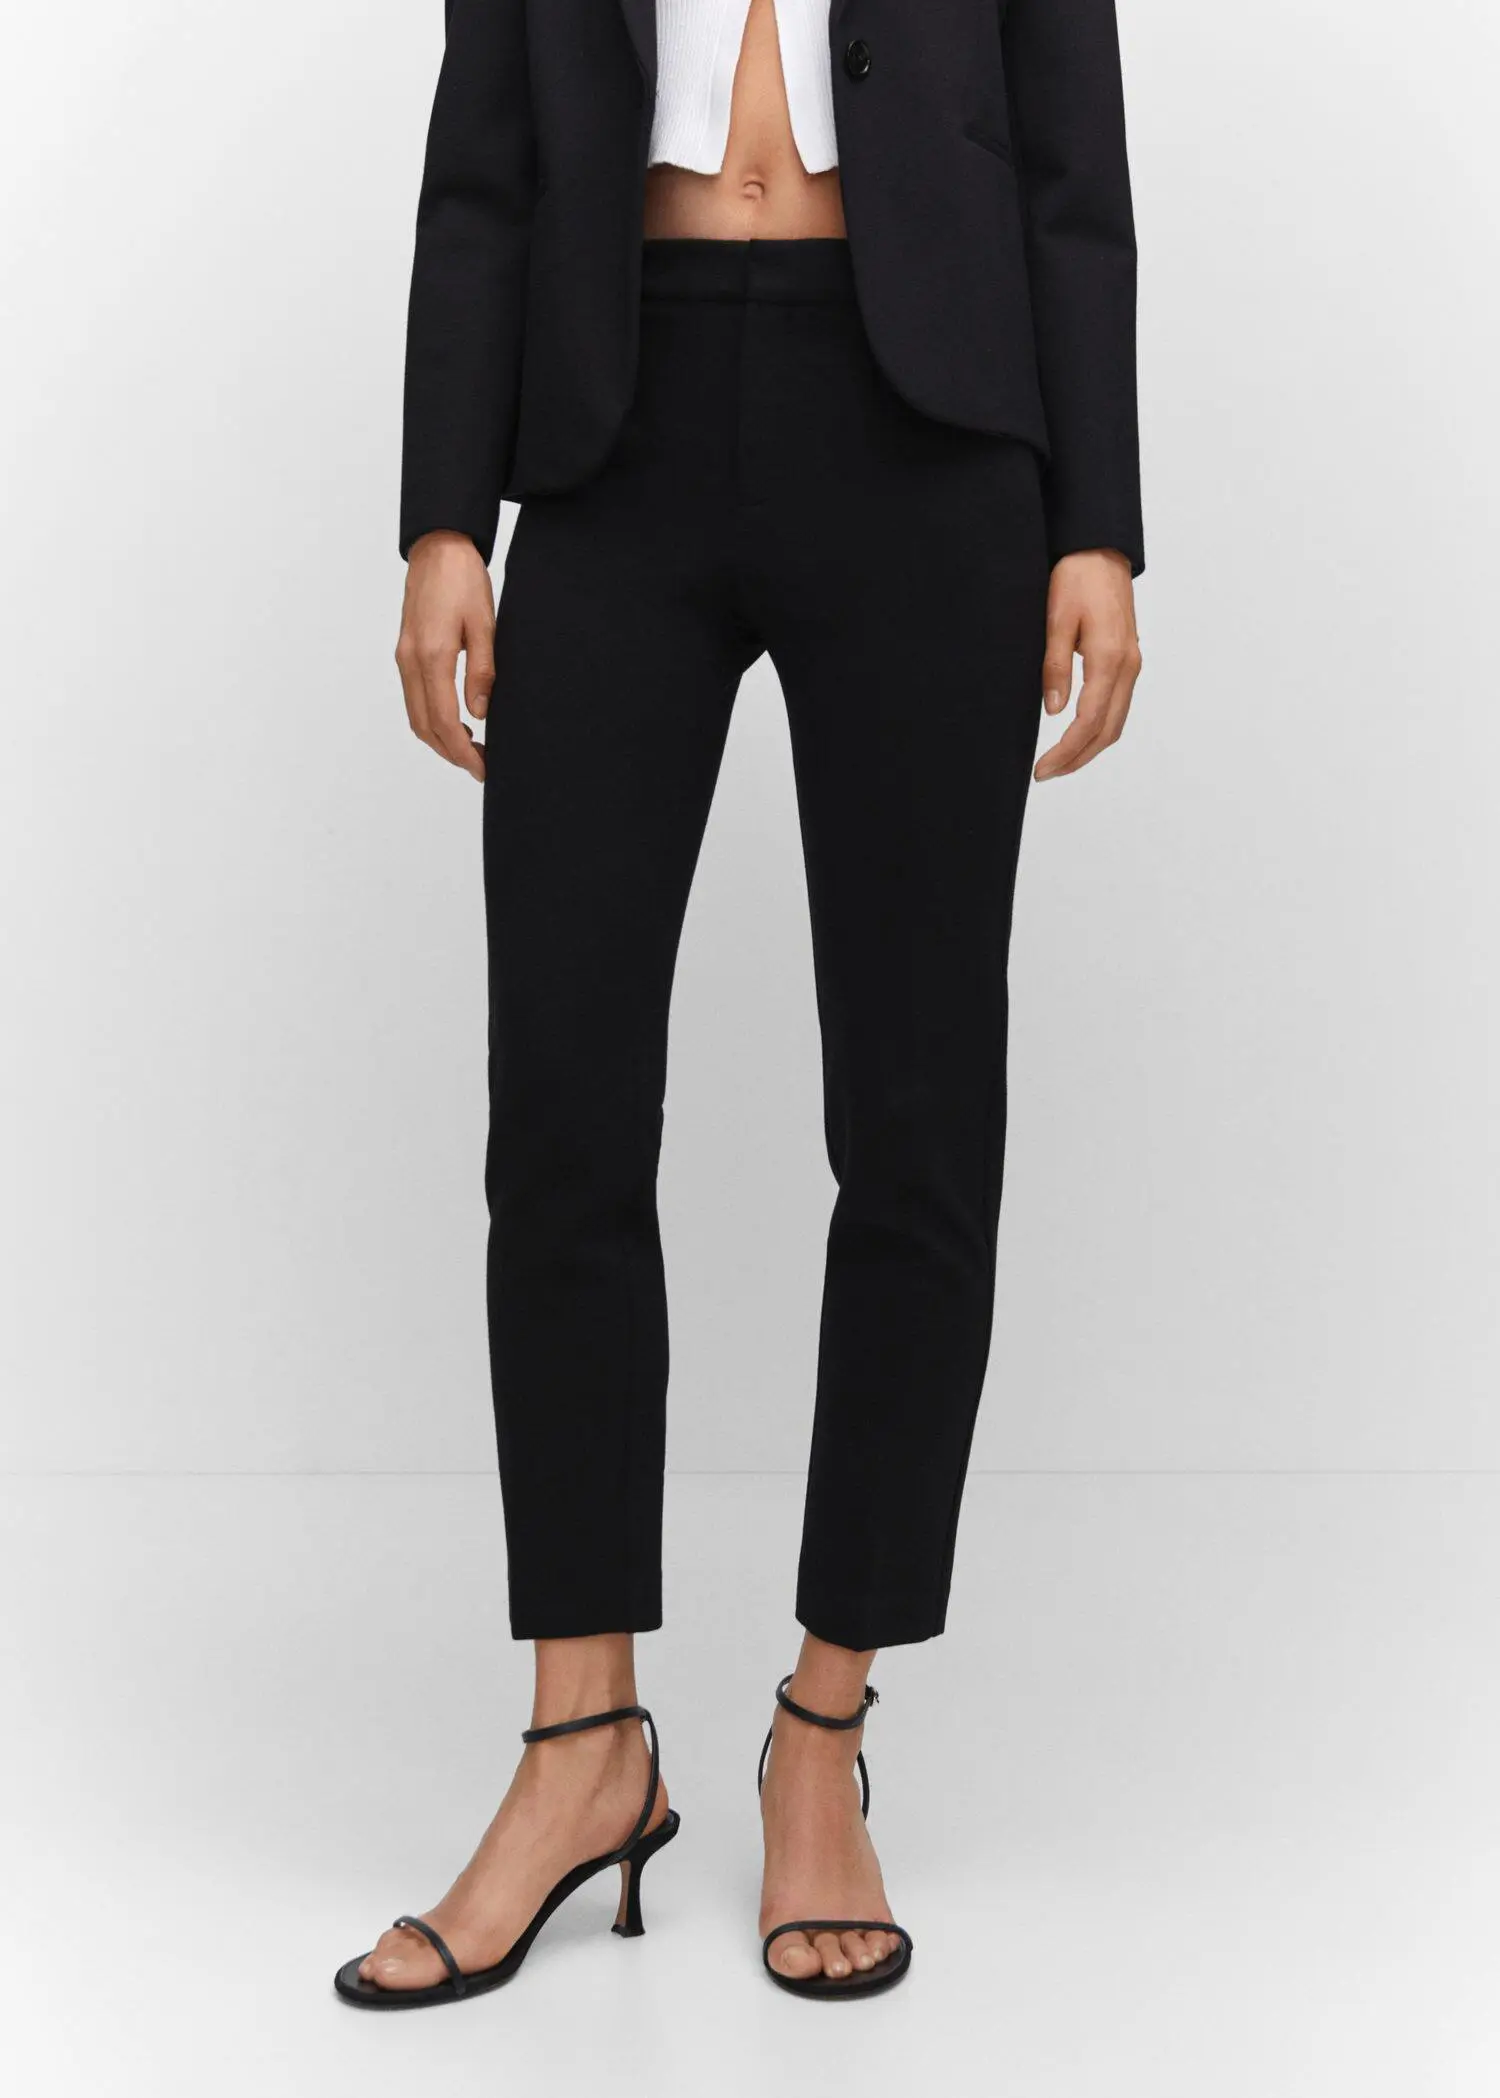 Mango Rome-knit straight trousers. a woman wearing black pants and a black jacket. 